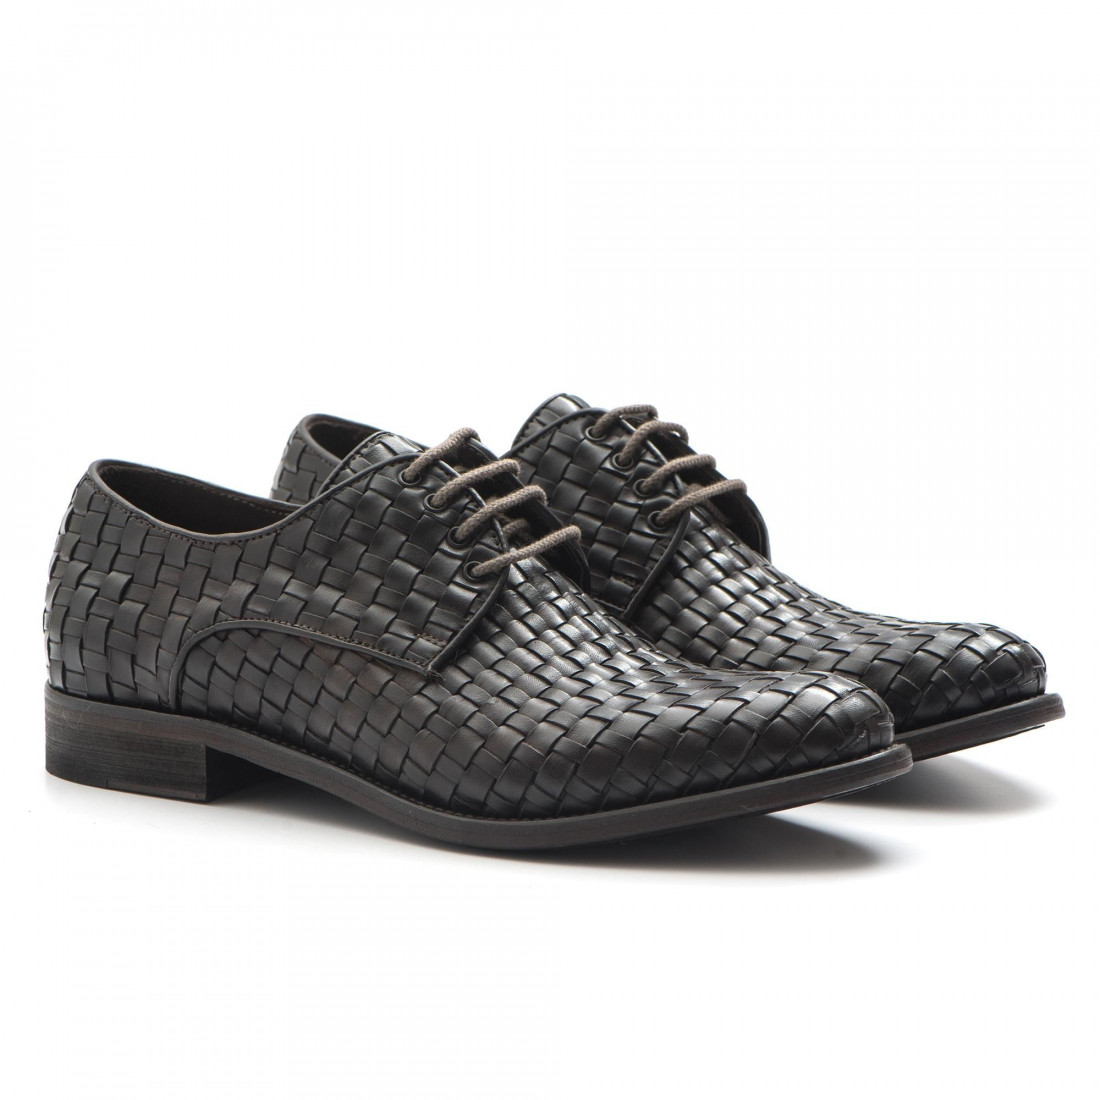 Derby shoes in soft brown woven leather